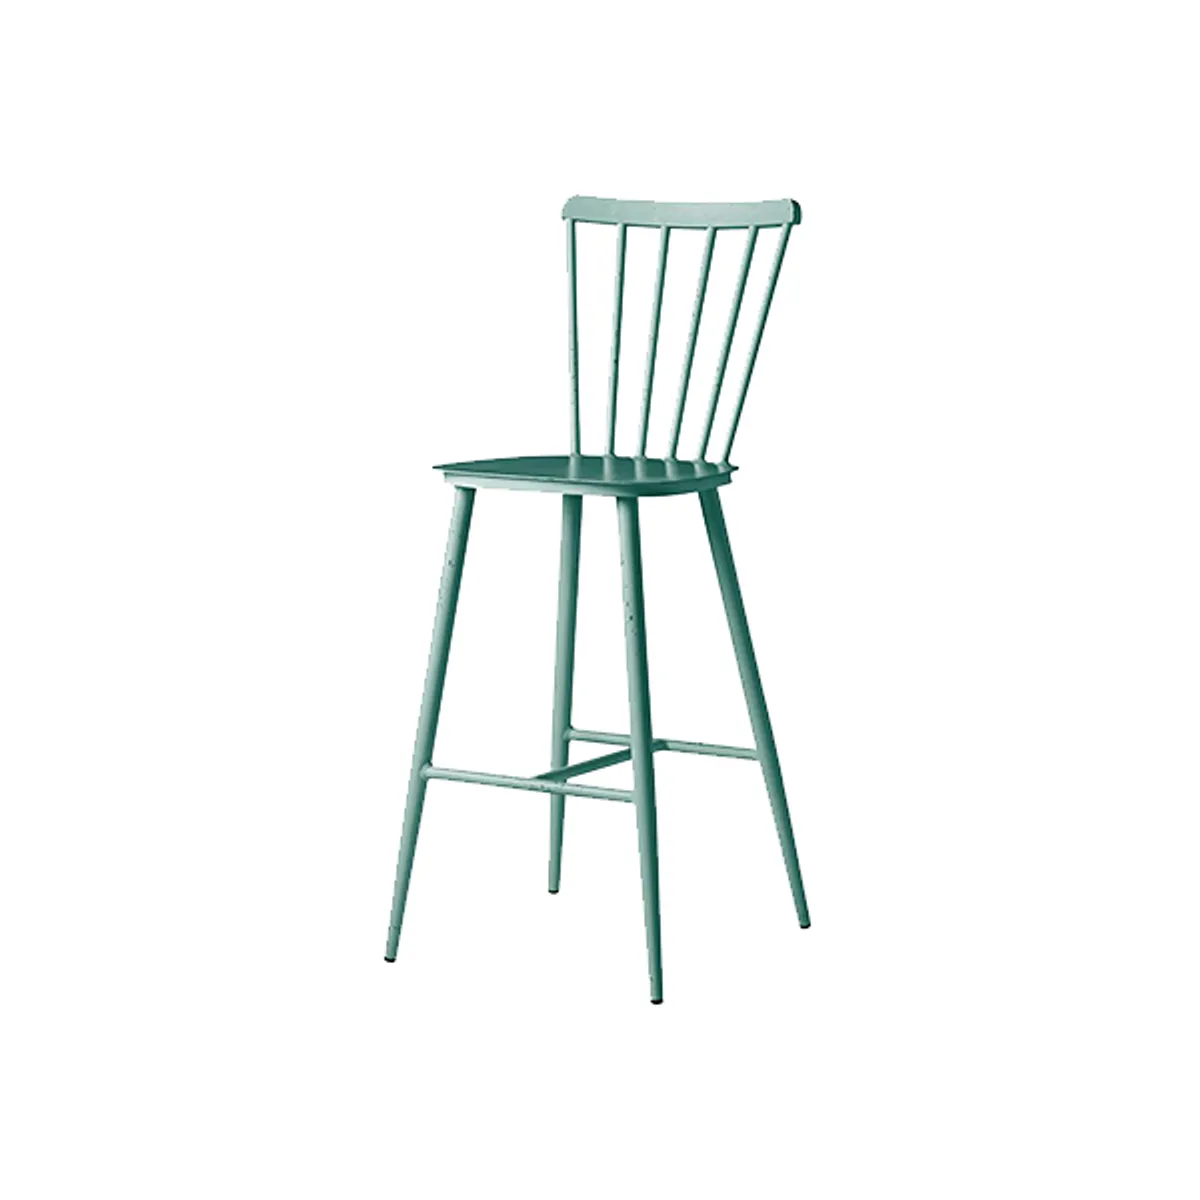 Spool Bar Stool Inside Out Contracts